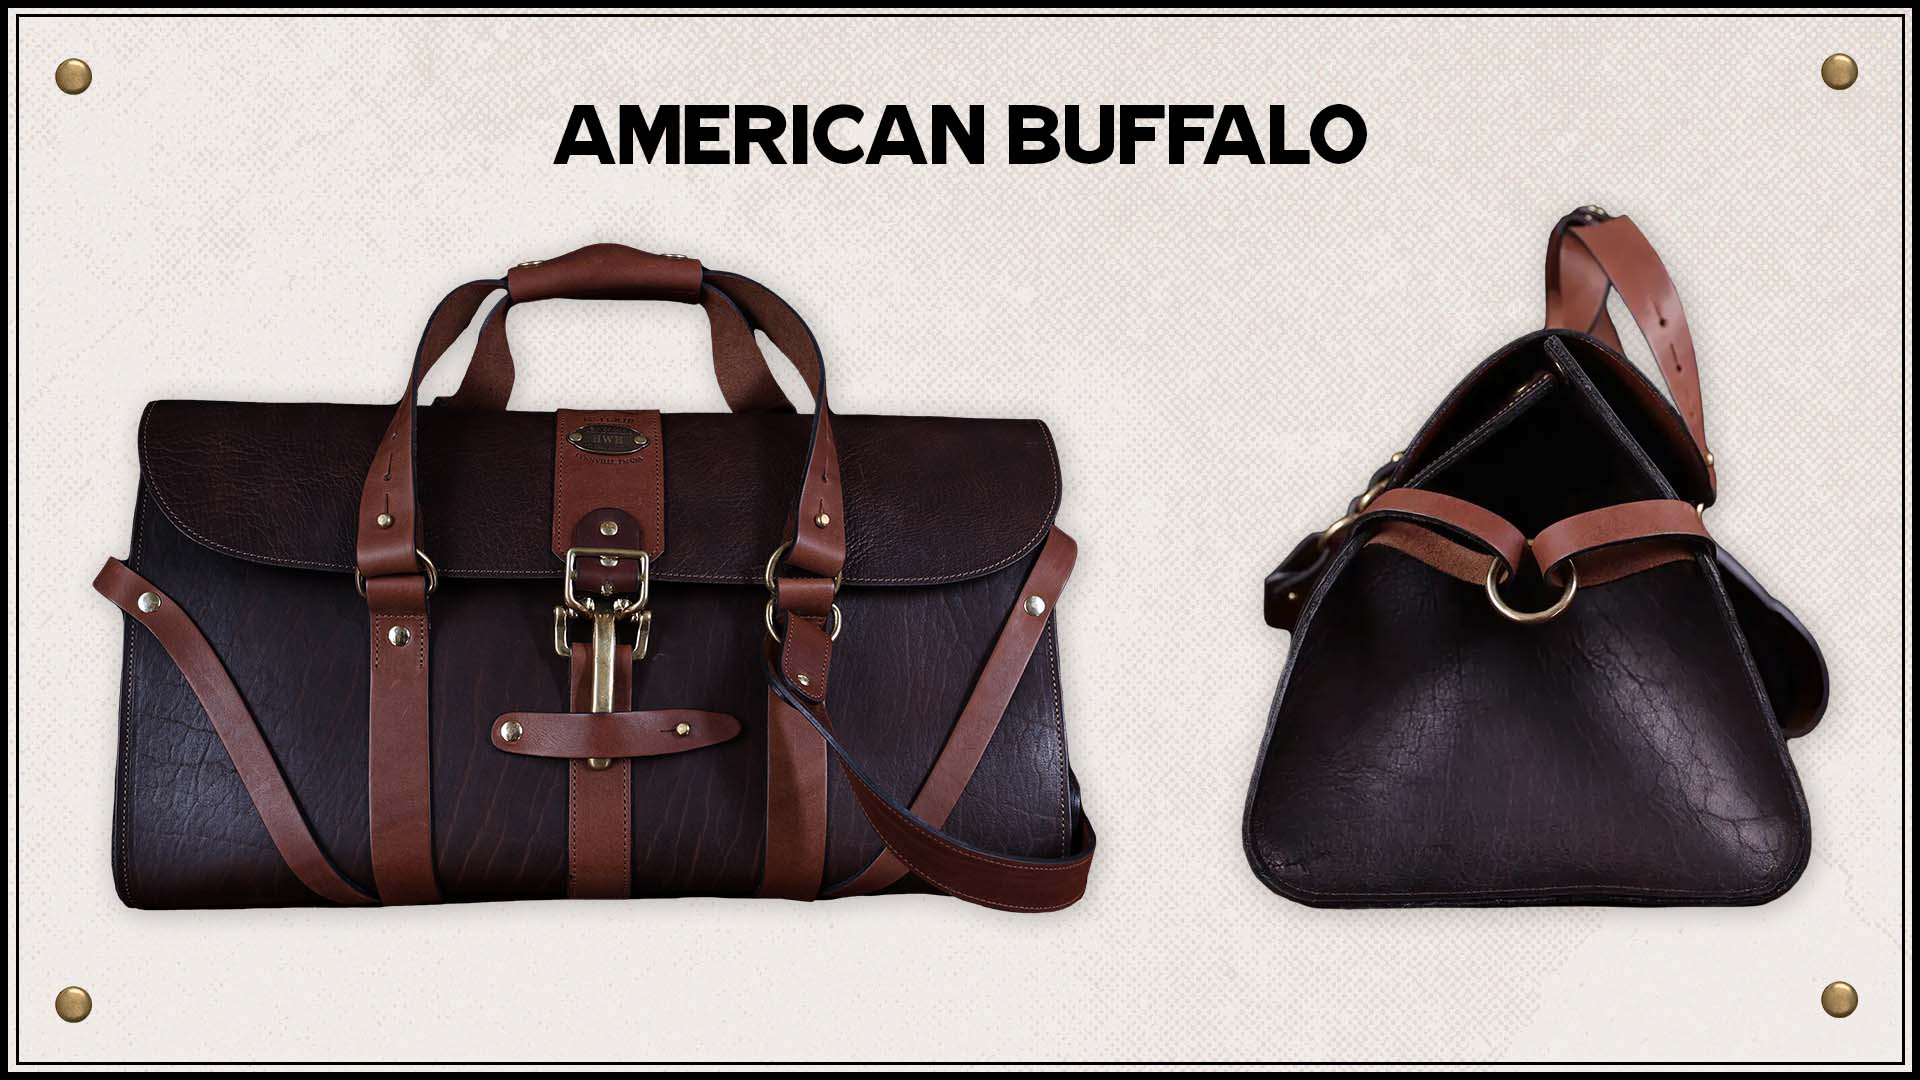 No. 1 Grip Bag front and side view in American Buffalo leather